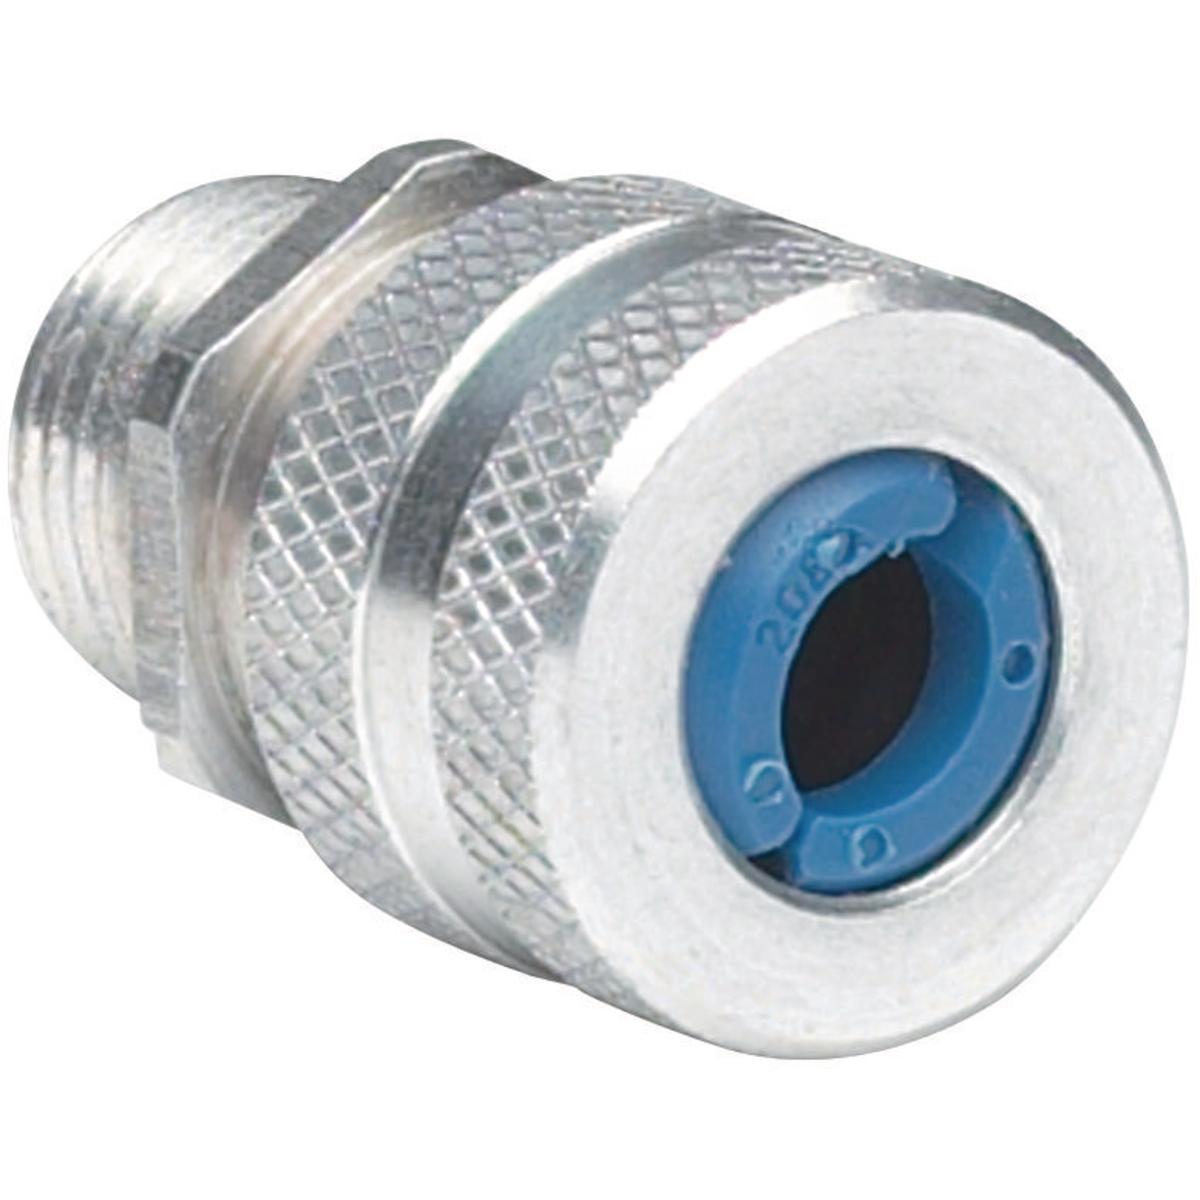 Hubbell ZS101 1/2" Aluminum Cord Connector, Cord Range .062-.125, Green  ; Aluminum construction resists corrosion ; Neoprene grommet seals out oil and moisture ; Nylon retention ring ensures superior holding power ; Aluminum construction resists corrosion. Neoprene gr